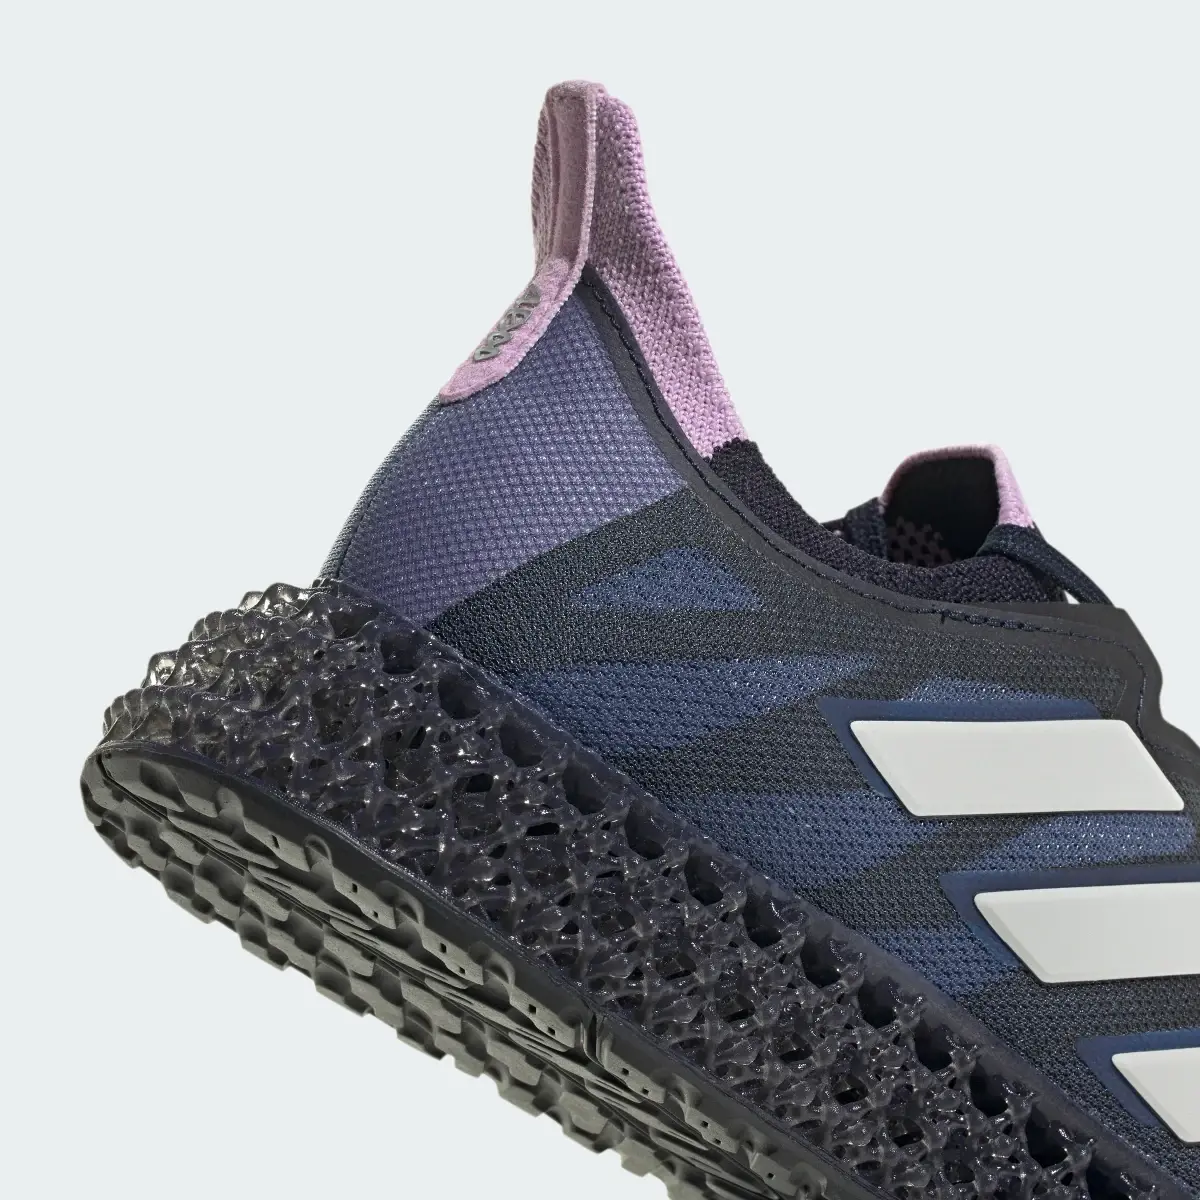 Adidas 4DFWD 3 Running Shoes. 3